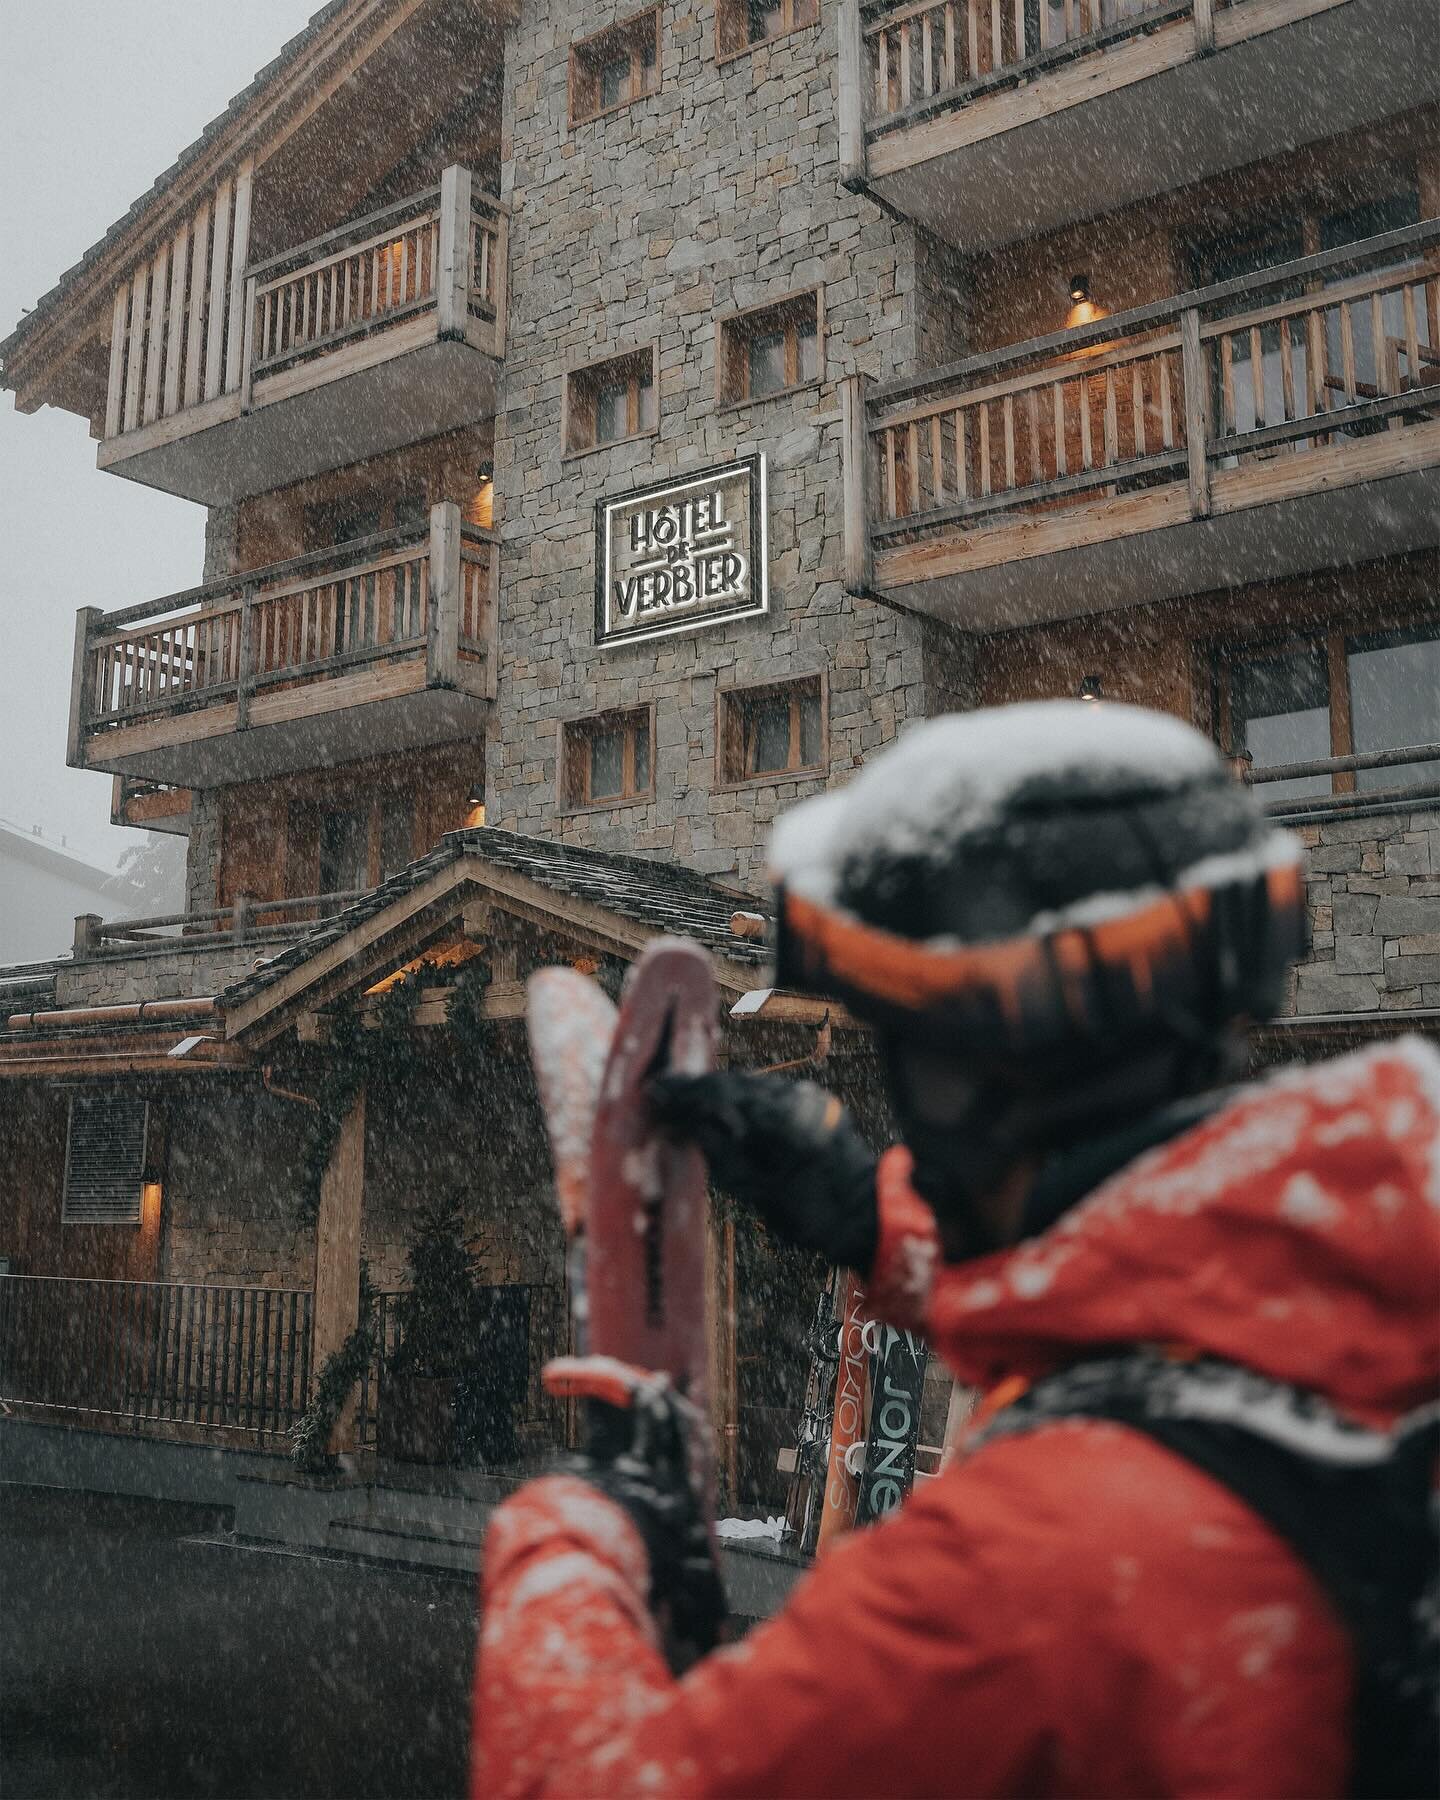 V E R B I E R  D A Y S // A few glimpses of what an epic day looks like in @verbier. I really miss the cozy morning light hitting our room and the fresh powder so much⛷️❄️

Big shout out to the boys @bxnmxclean @ramiravasio and @ashrr for an incredib